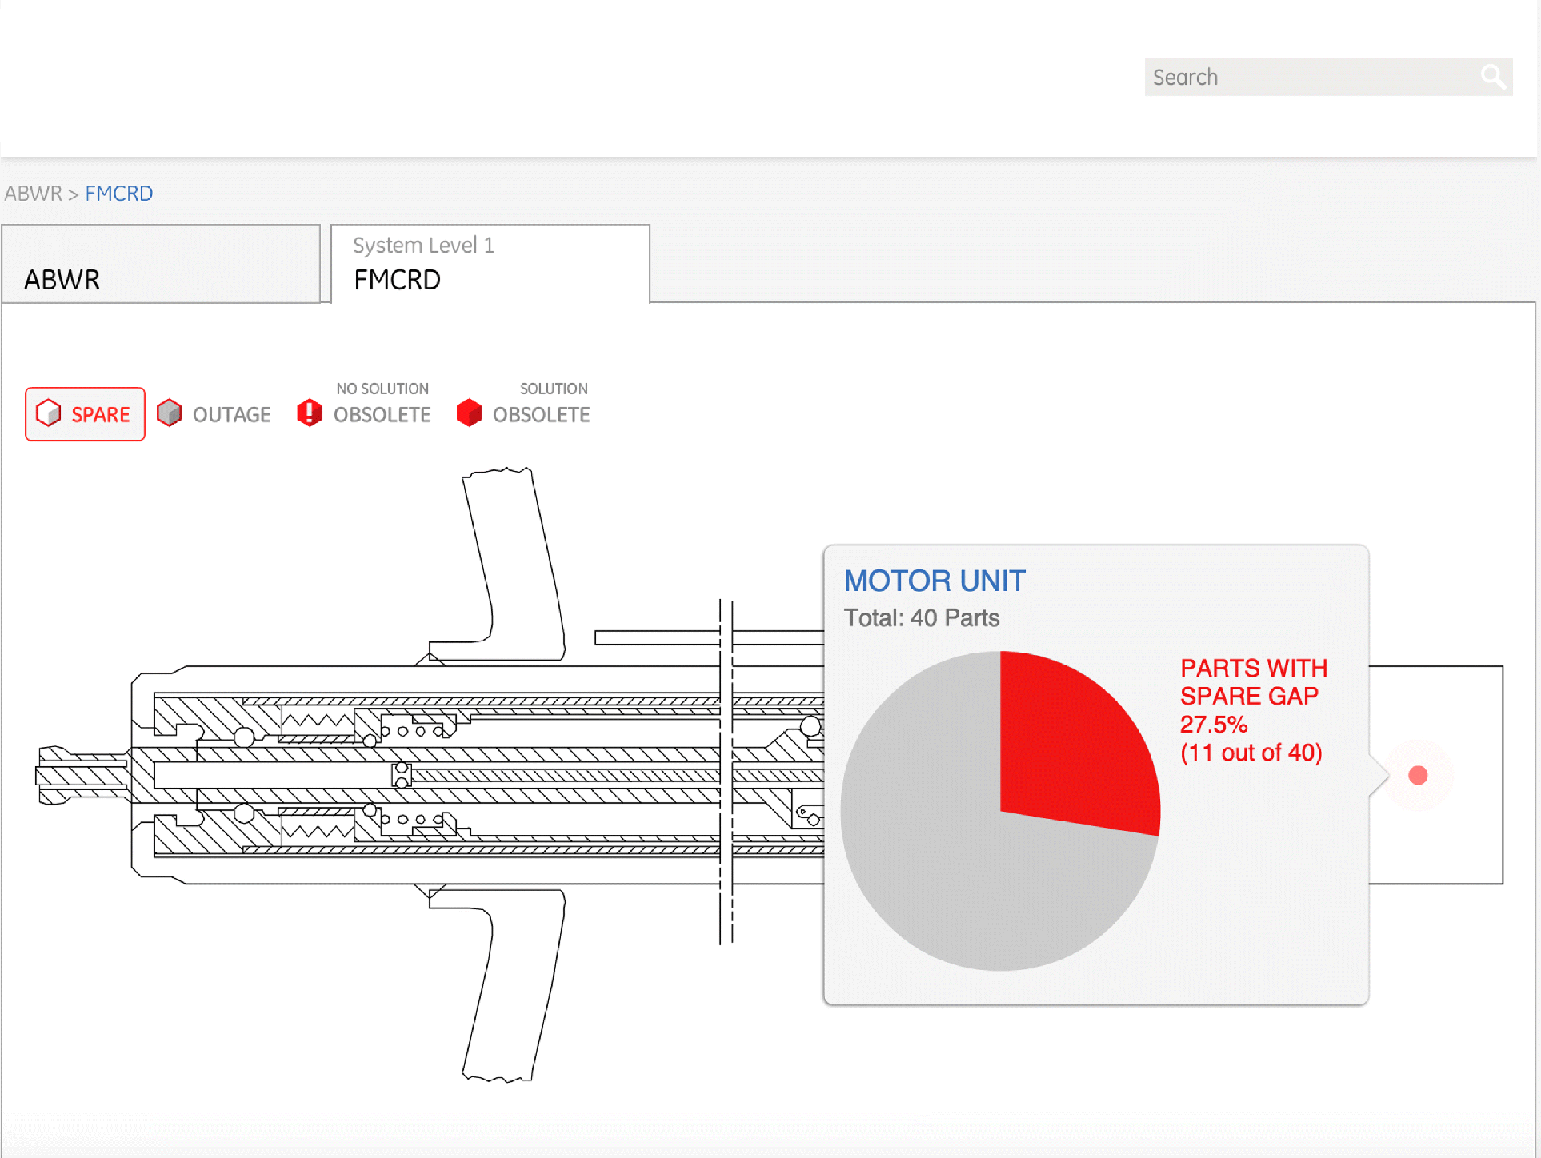 A screenshot depicting the dynamically visualized spare parts of nuclear spare parts provider. The pie chart is representing for motor unit where parts with spare gap is 27.5% (11 out of 40).